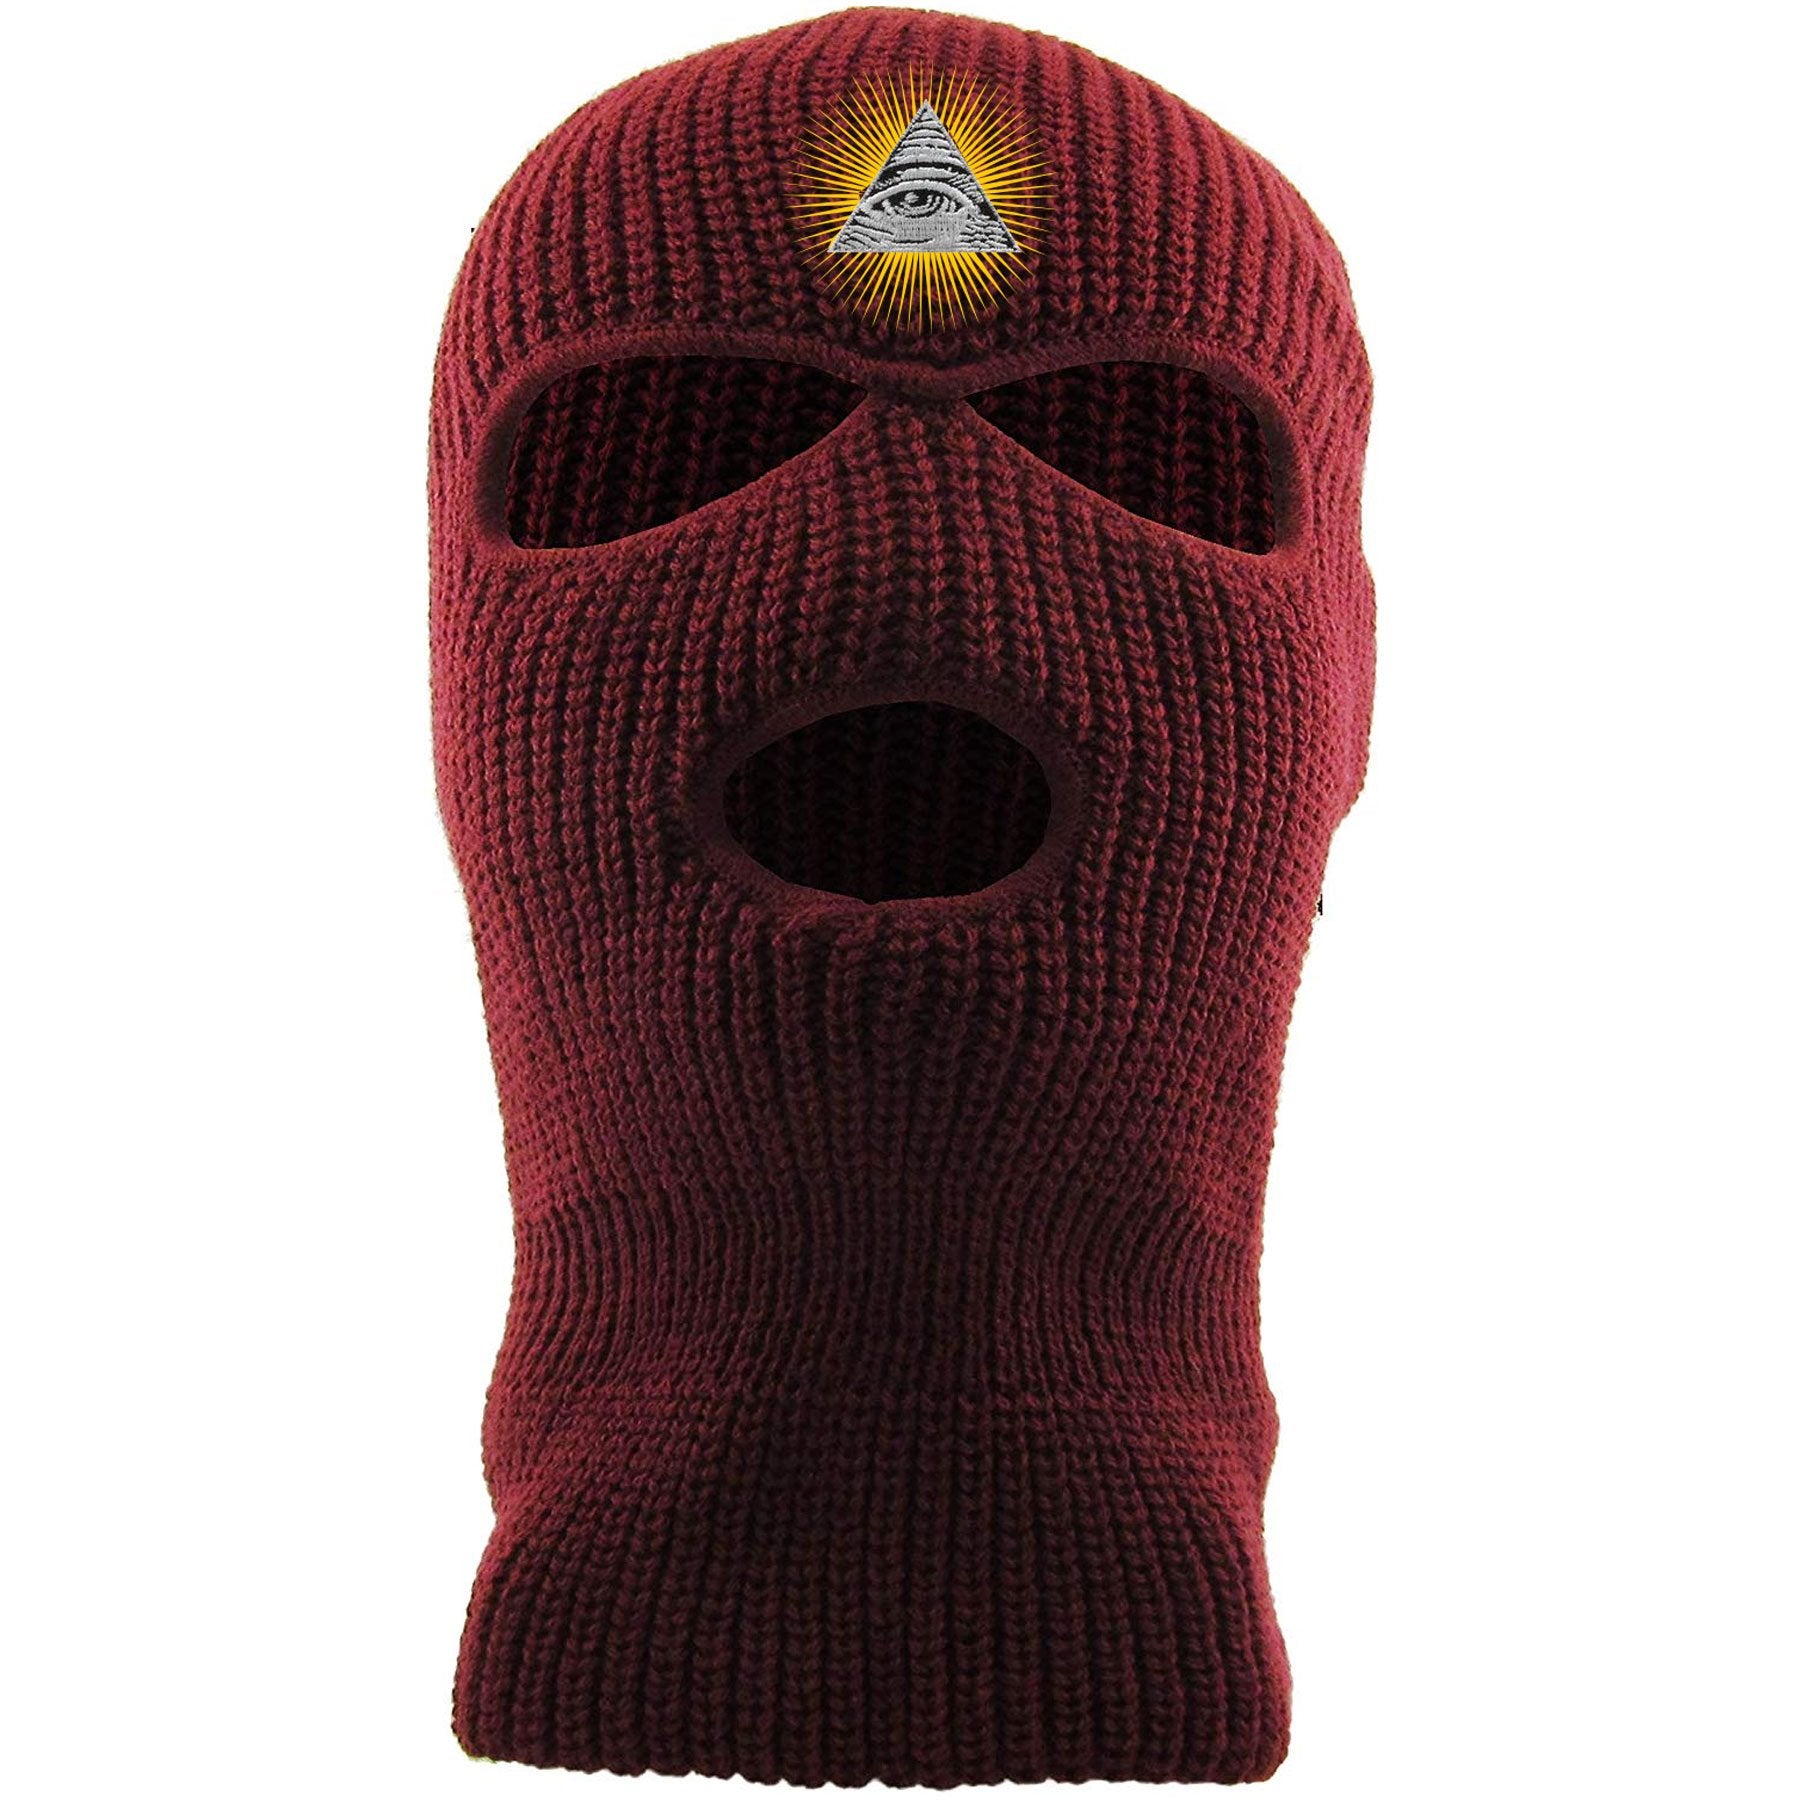 Embroidered on the forehead of the all seeing eye pyramid maroon ski mask is the all seeing eye pyramid embroidered in white, black and gold